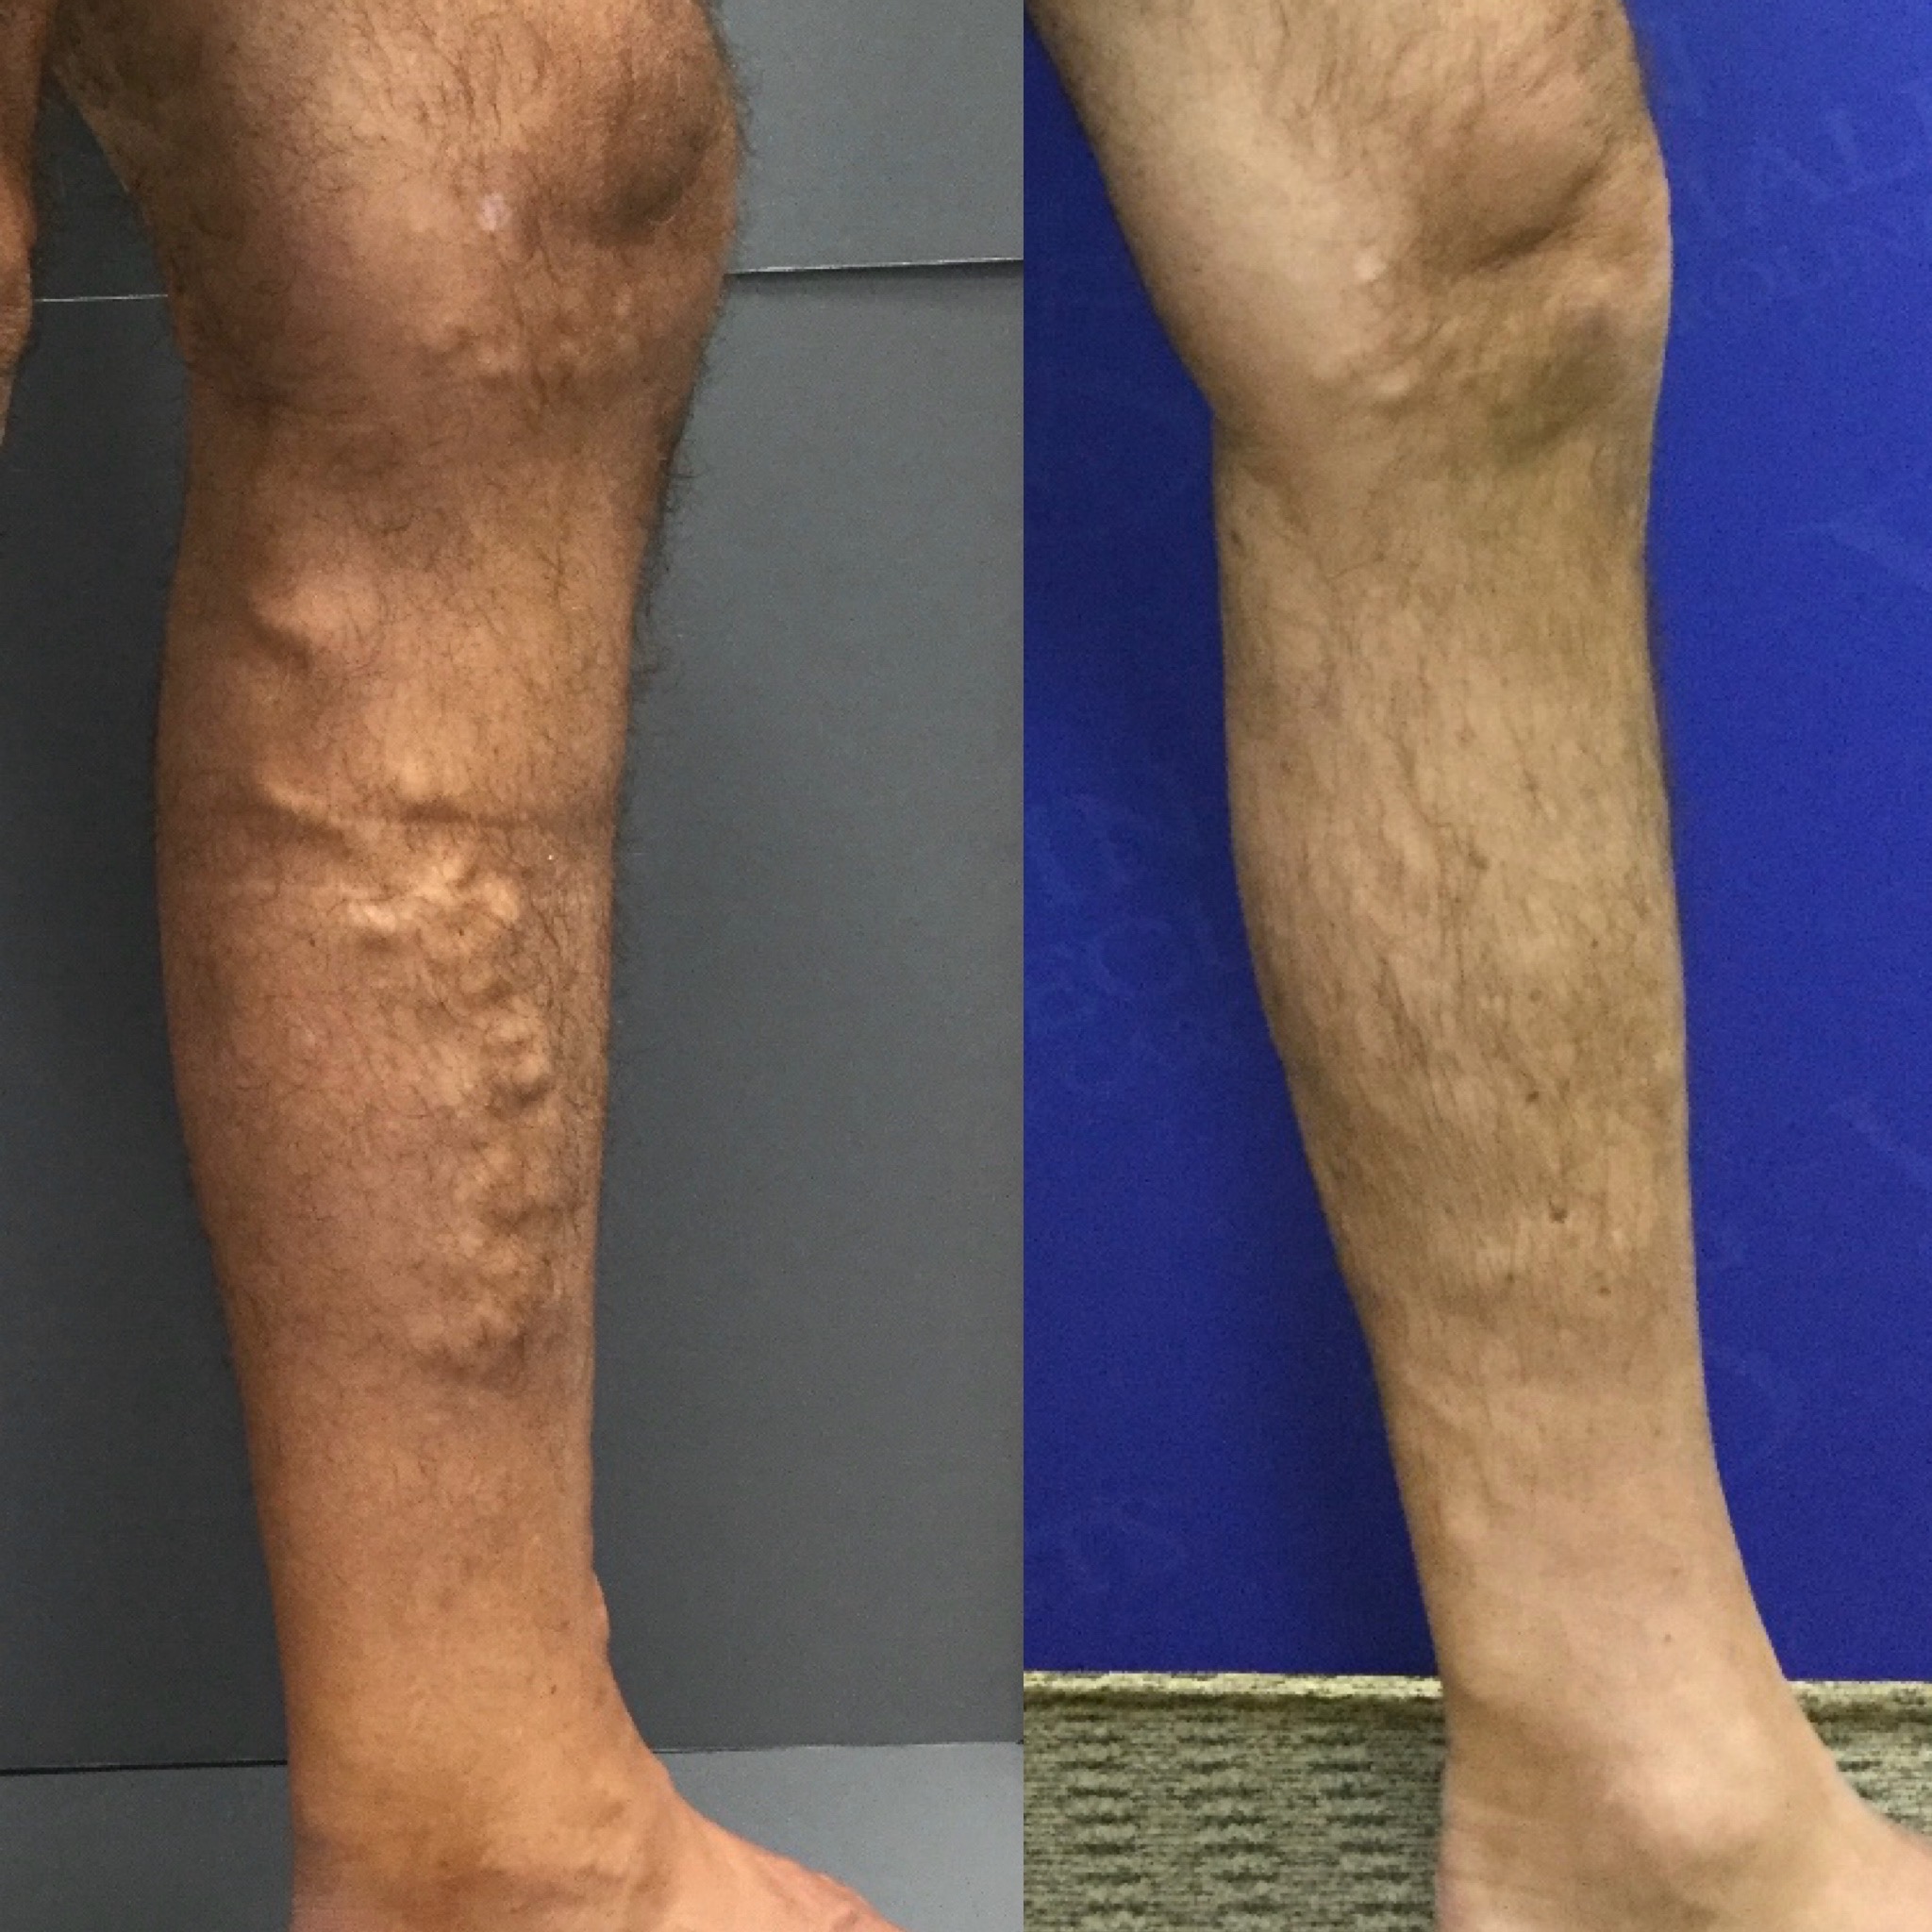 Before and After- Varicose Veins 2